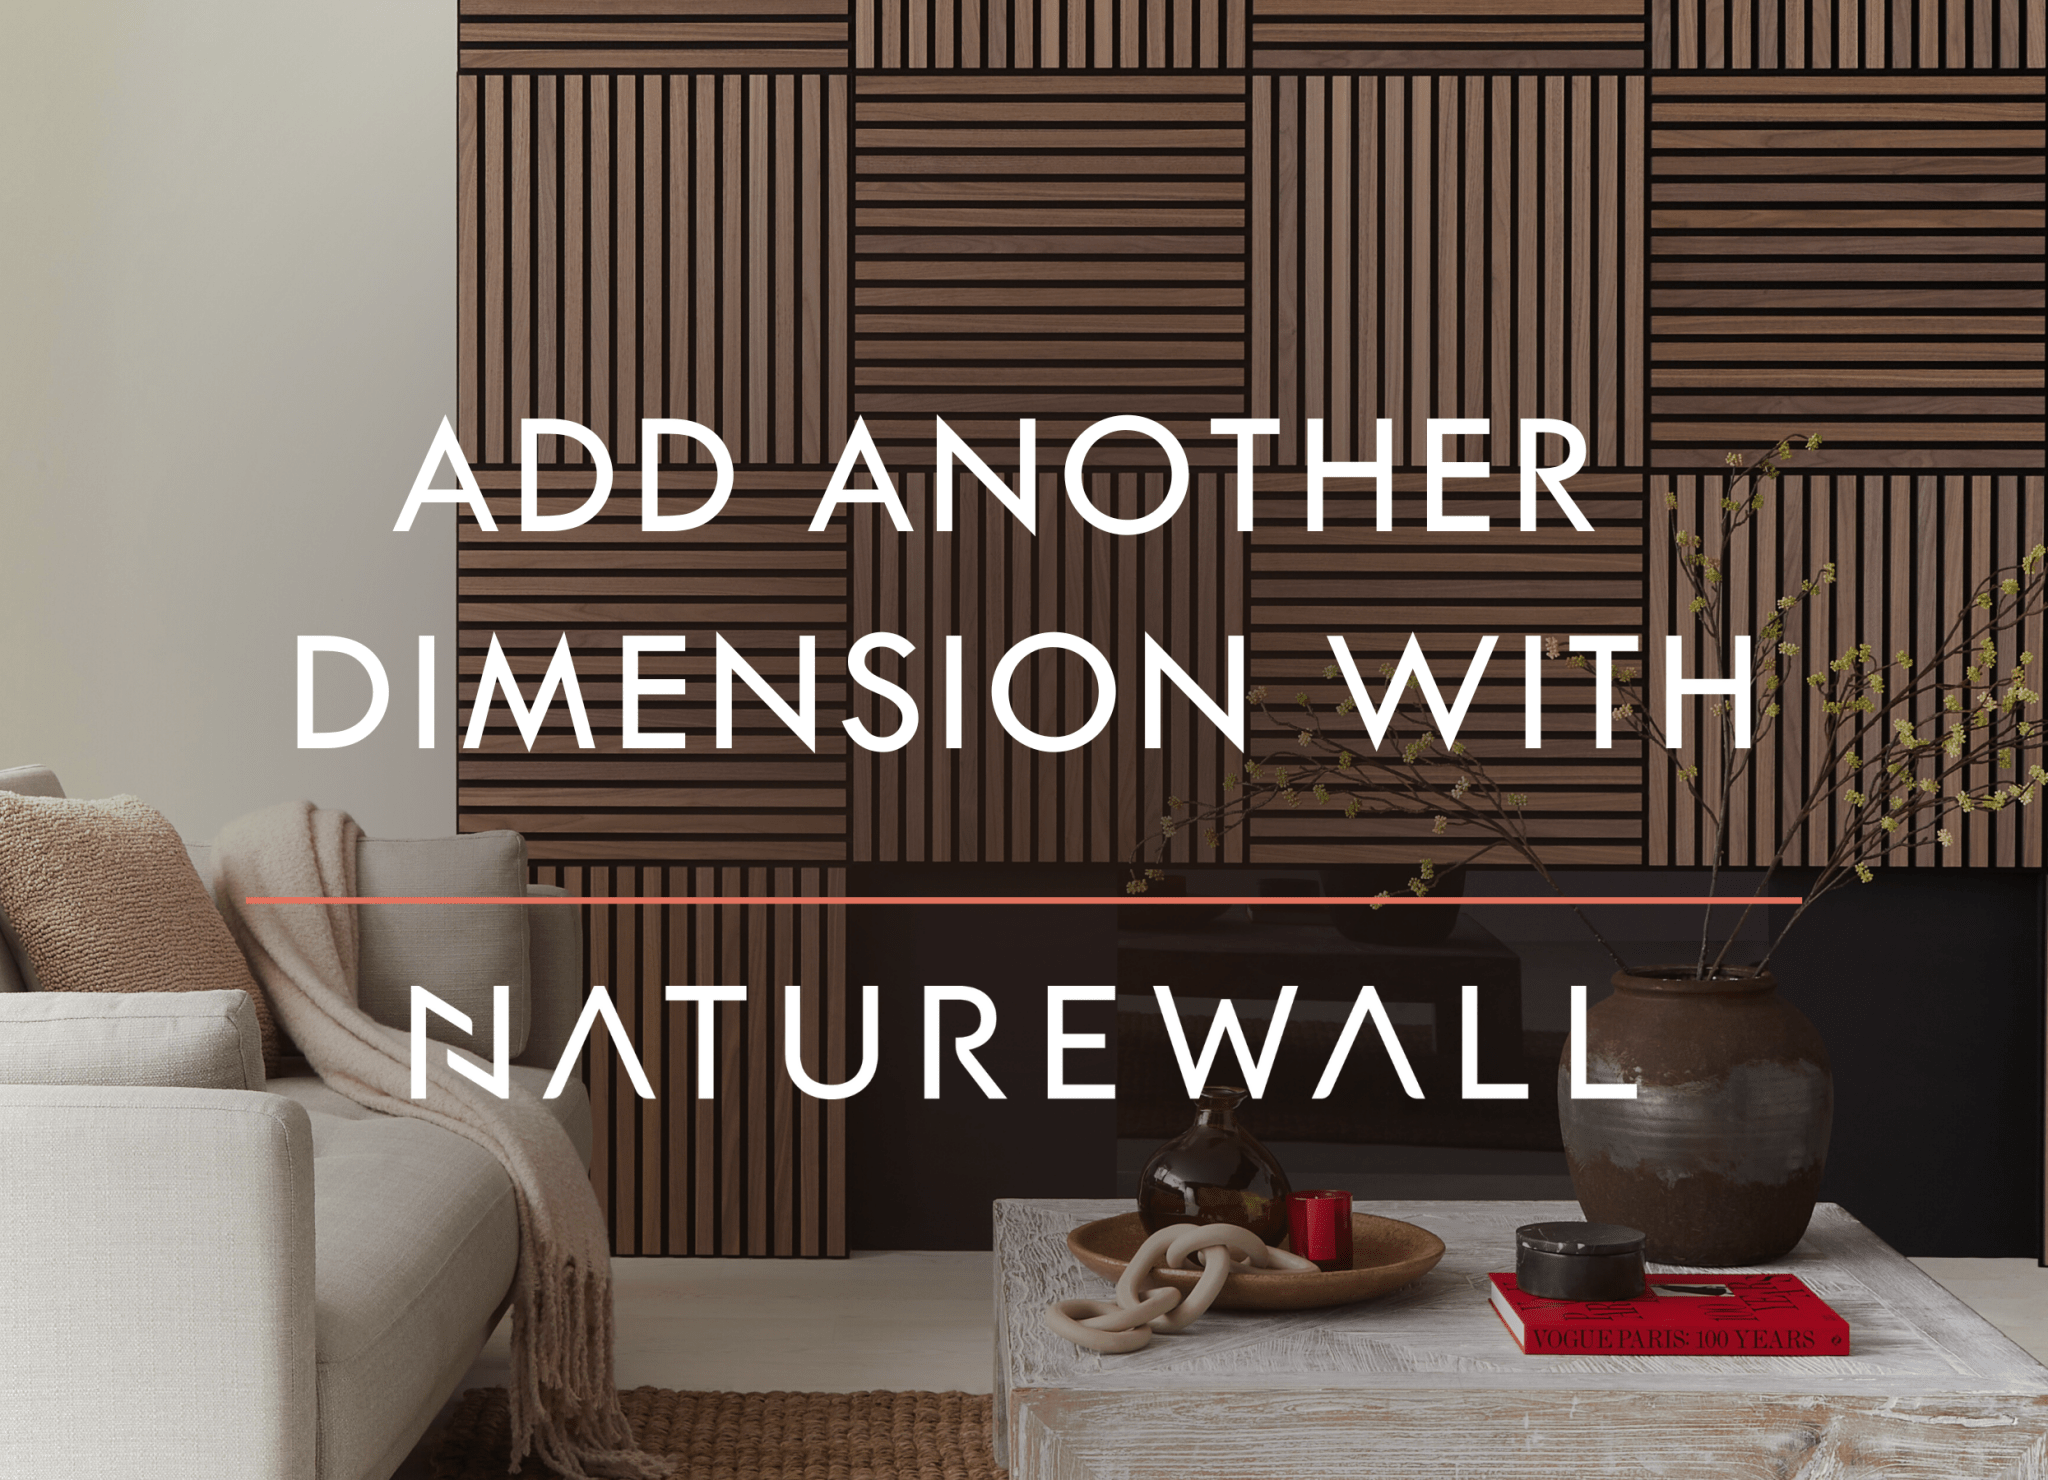 Naturewall Adds Another Dimension